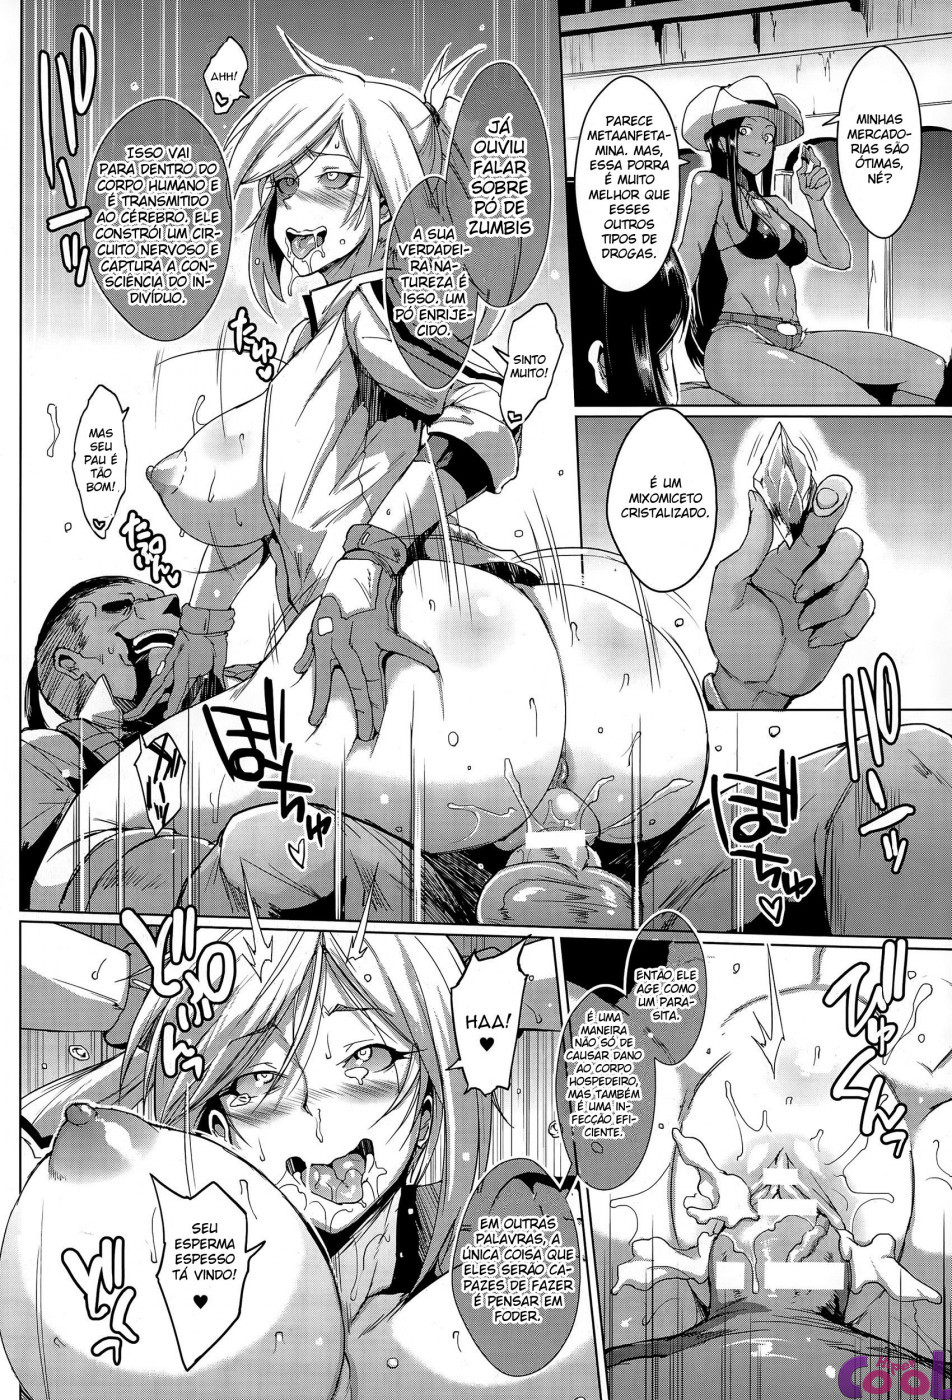 voodoo-squad-chuuhen-chapter-01-page-04.jpg